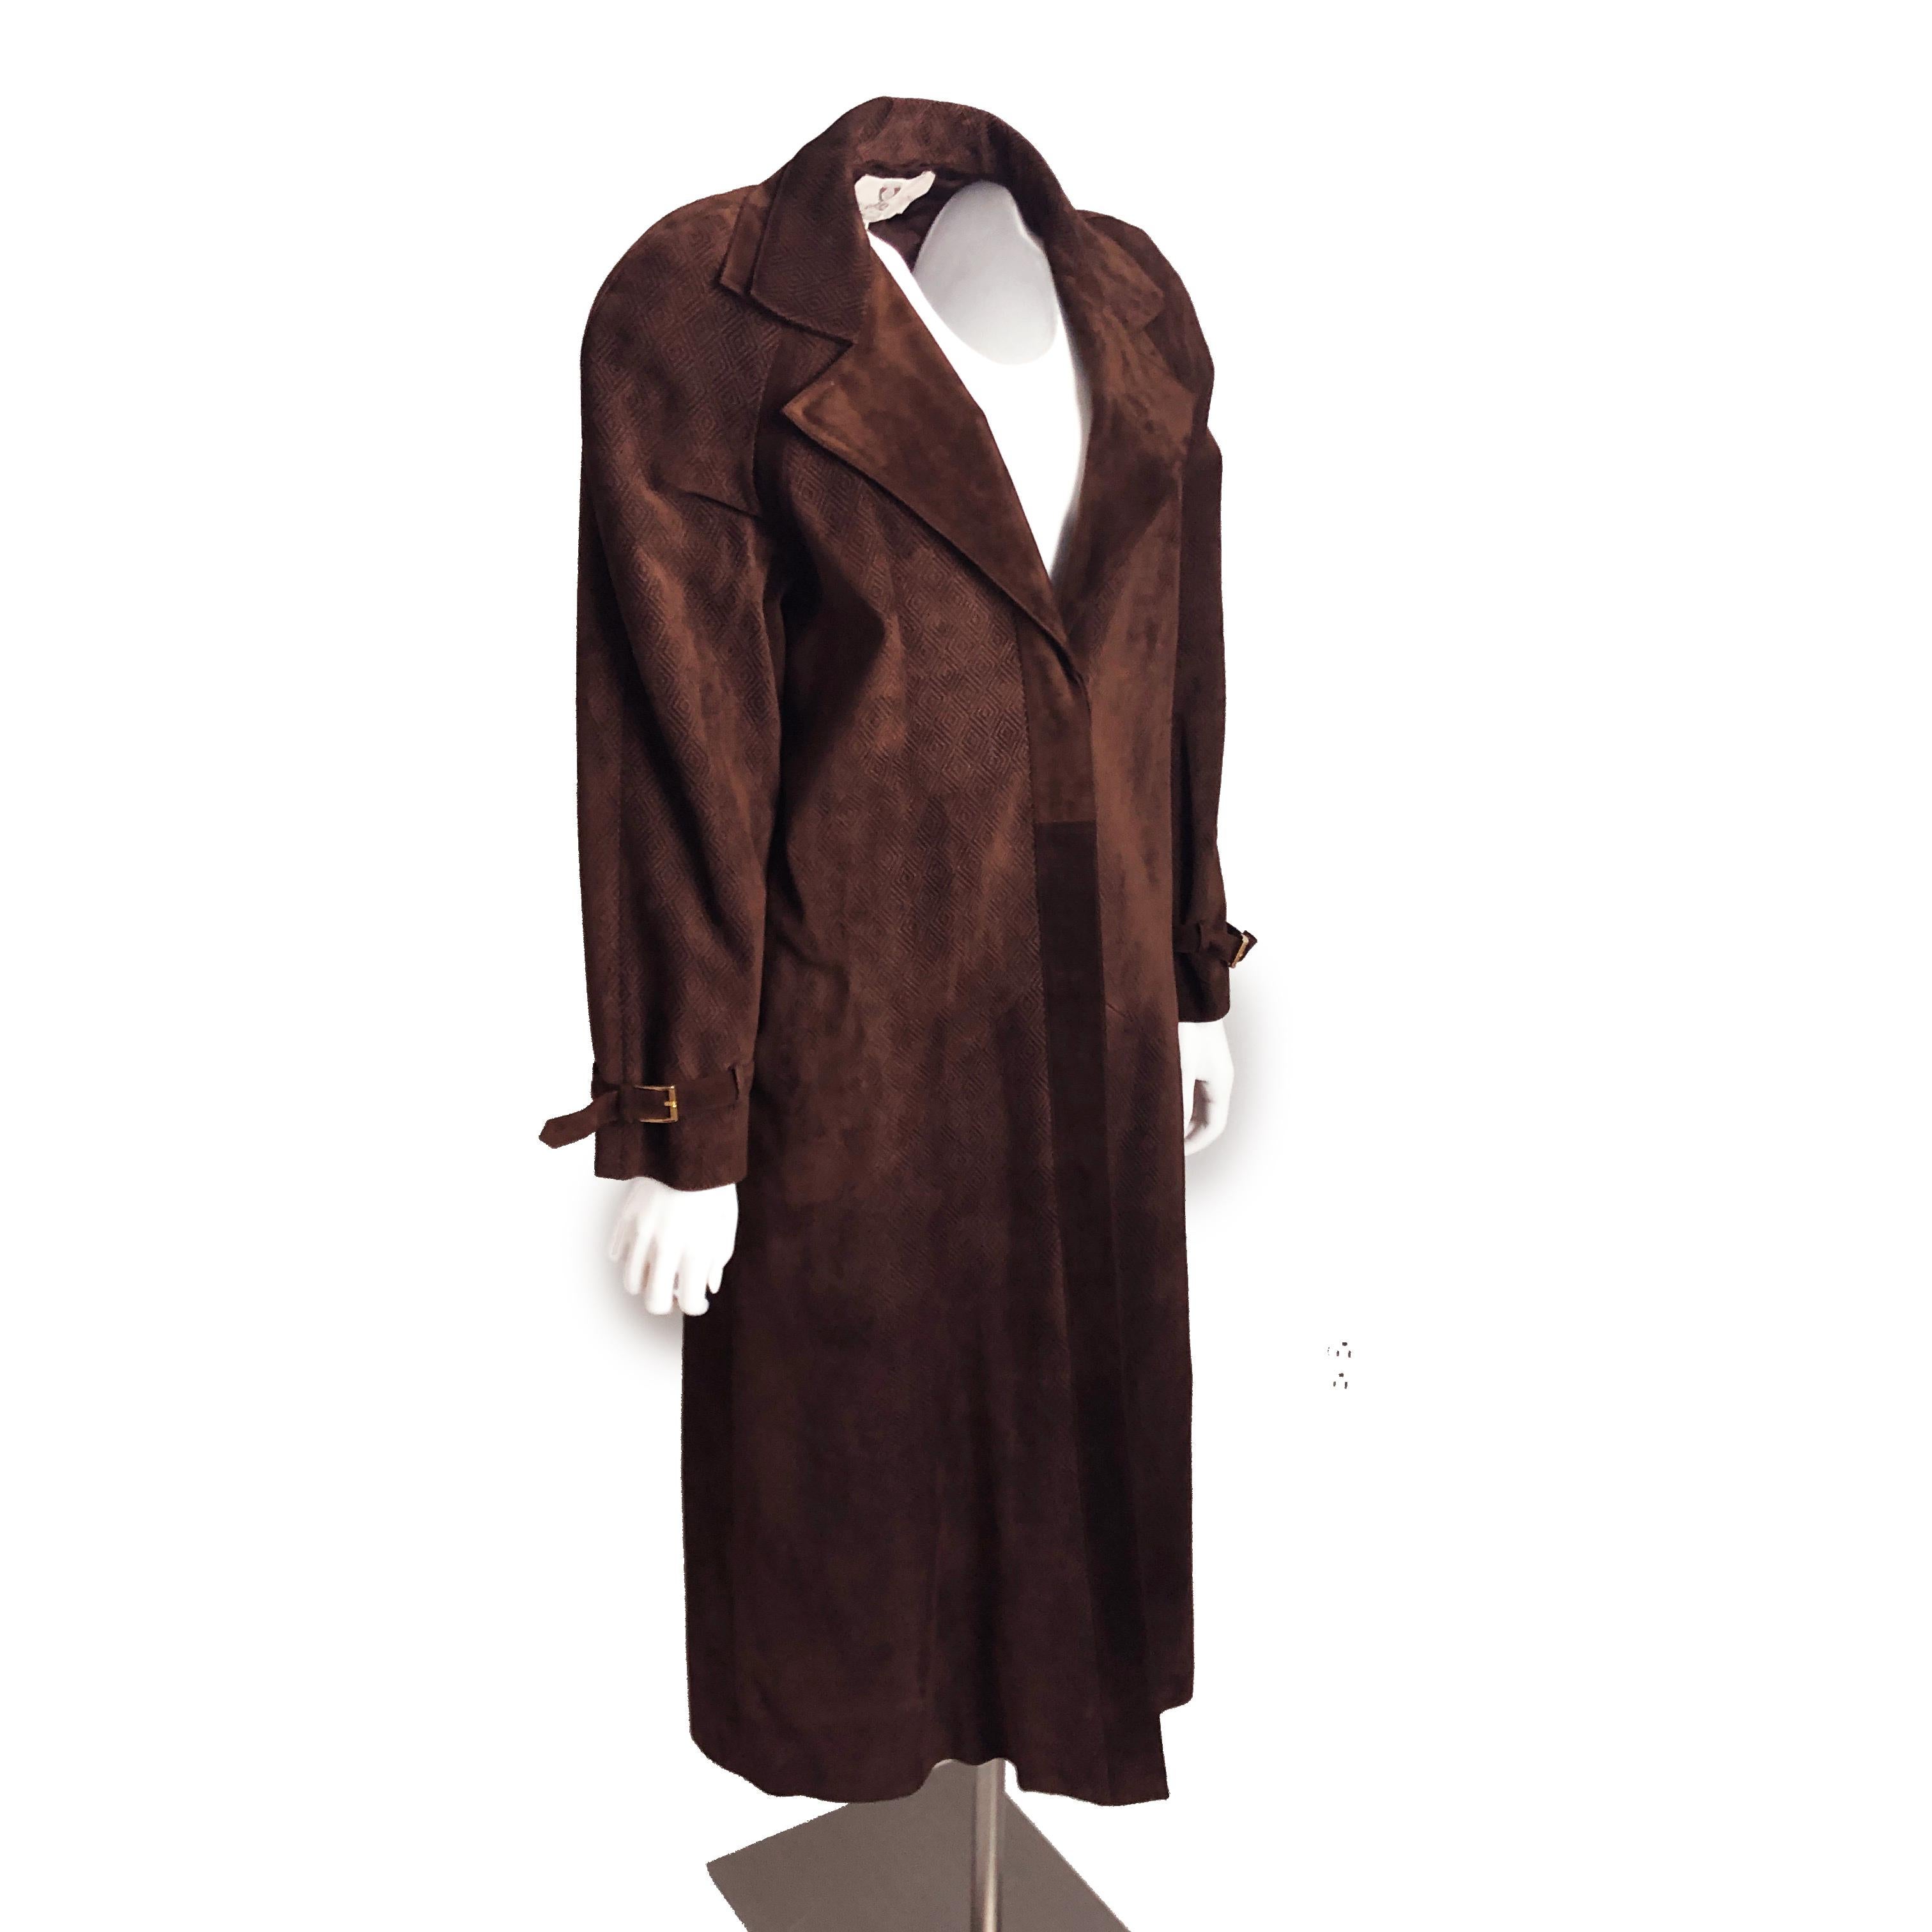 A wonderful vintage suede leather coat and skirt ensemble, made by Gucci most likely in the late 1970s or early 80s.

Made from an incredibly supple chocolate suede leather with diamond textured patterns throughout, the coat features cinched